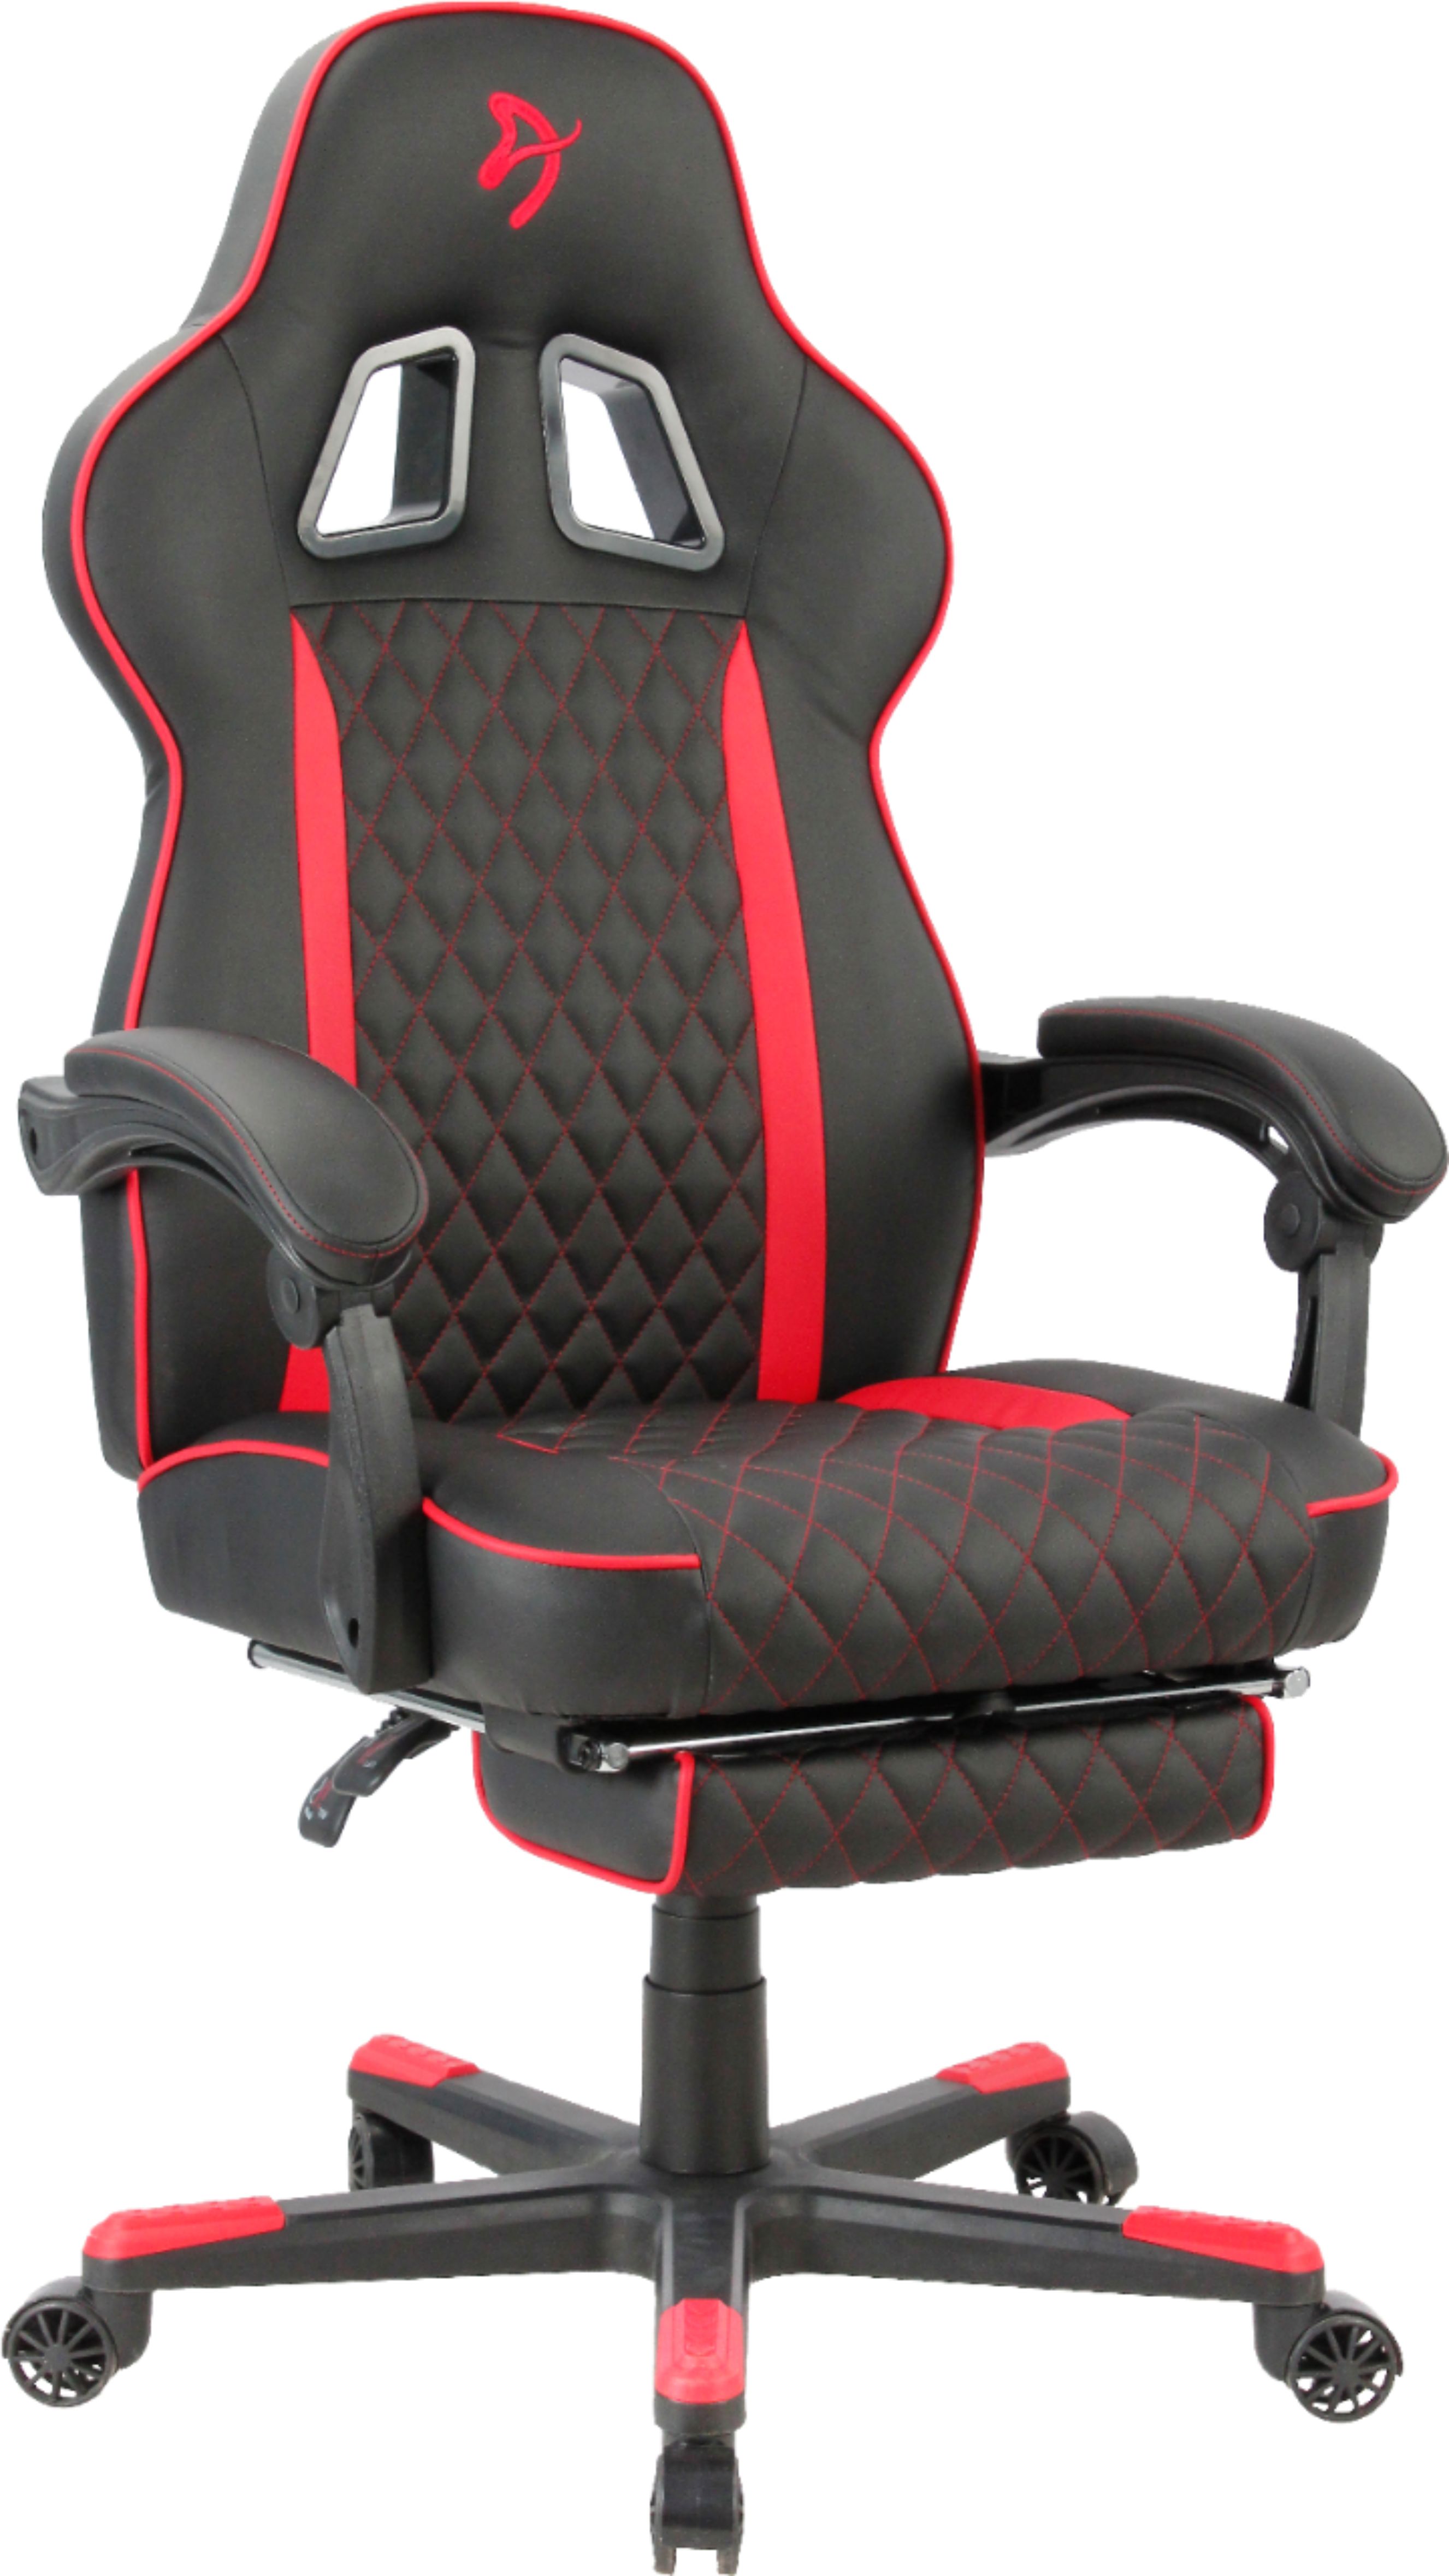 Angle View: Arozzi - Primo Premium PU Leather Gaming/Office Chair - Black - Gold Accents